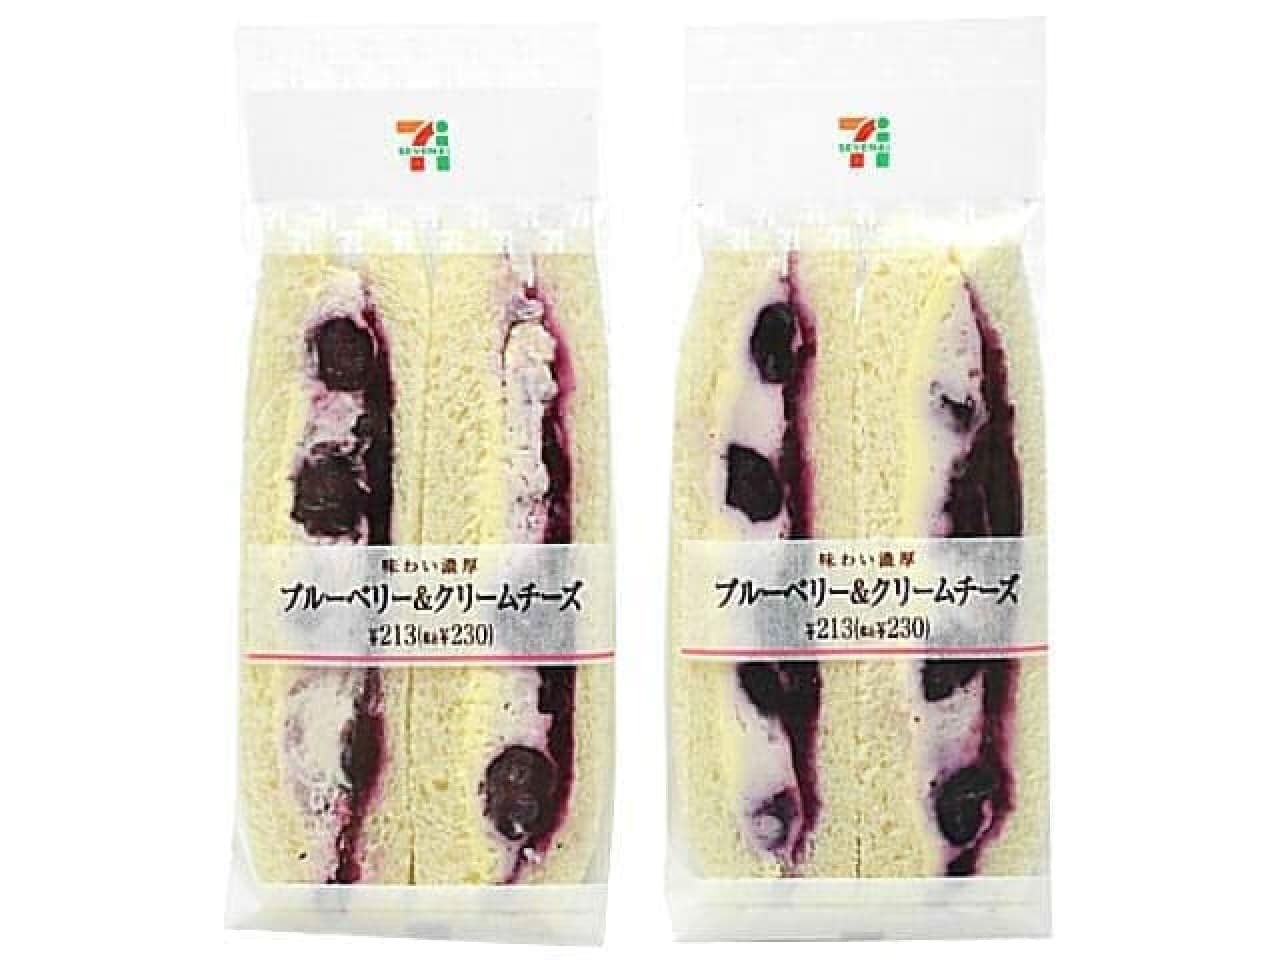 7-ELEVEN new product "Blueberry & Cream Cheese Sandwich"